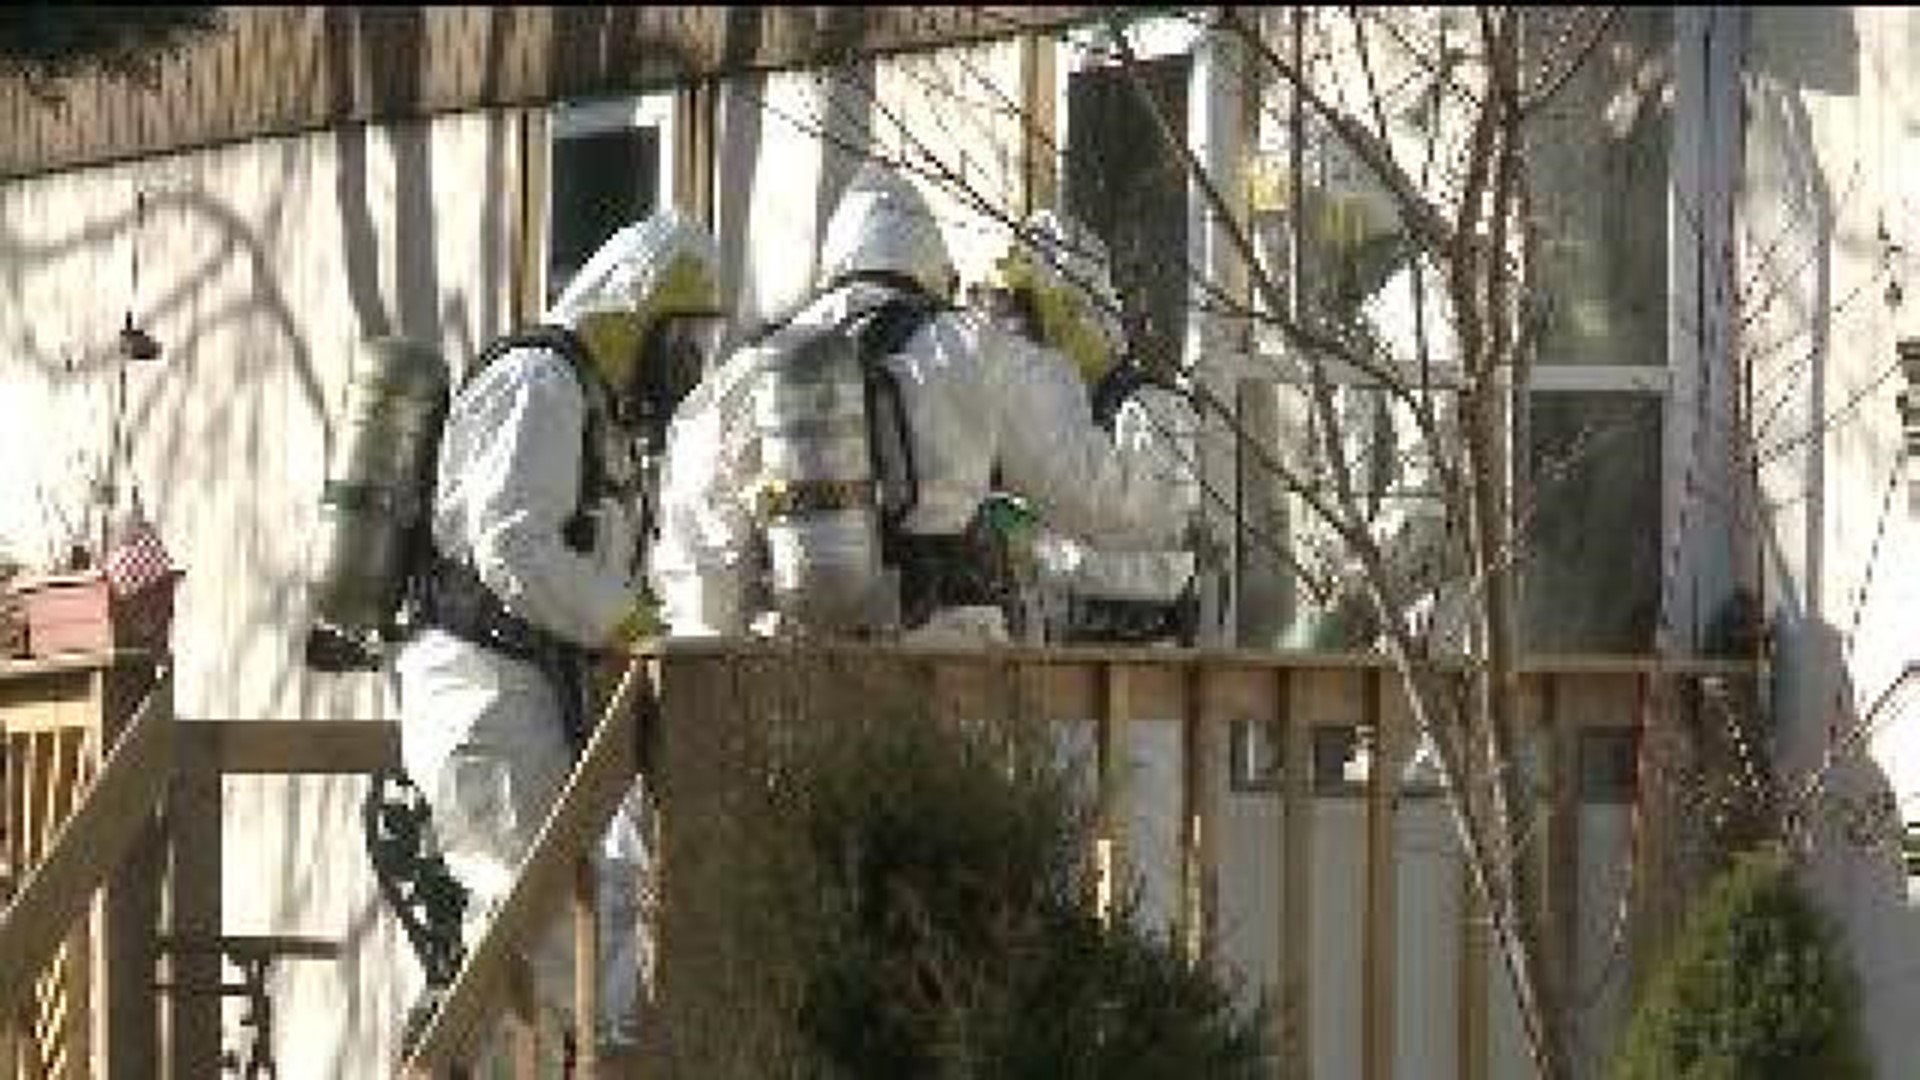 Makings of Meth Lab, Pipe Bomb Discovered